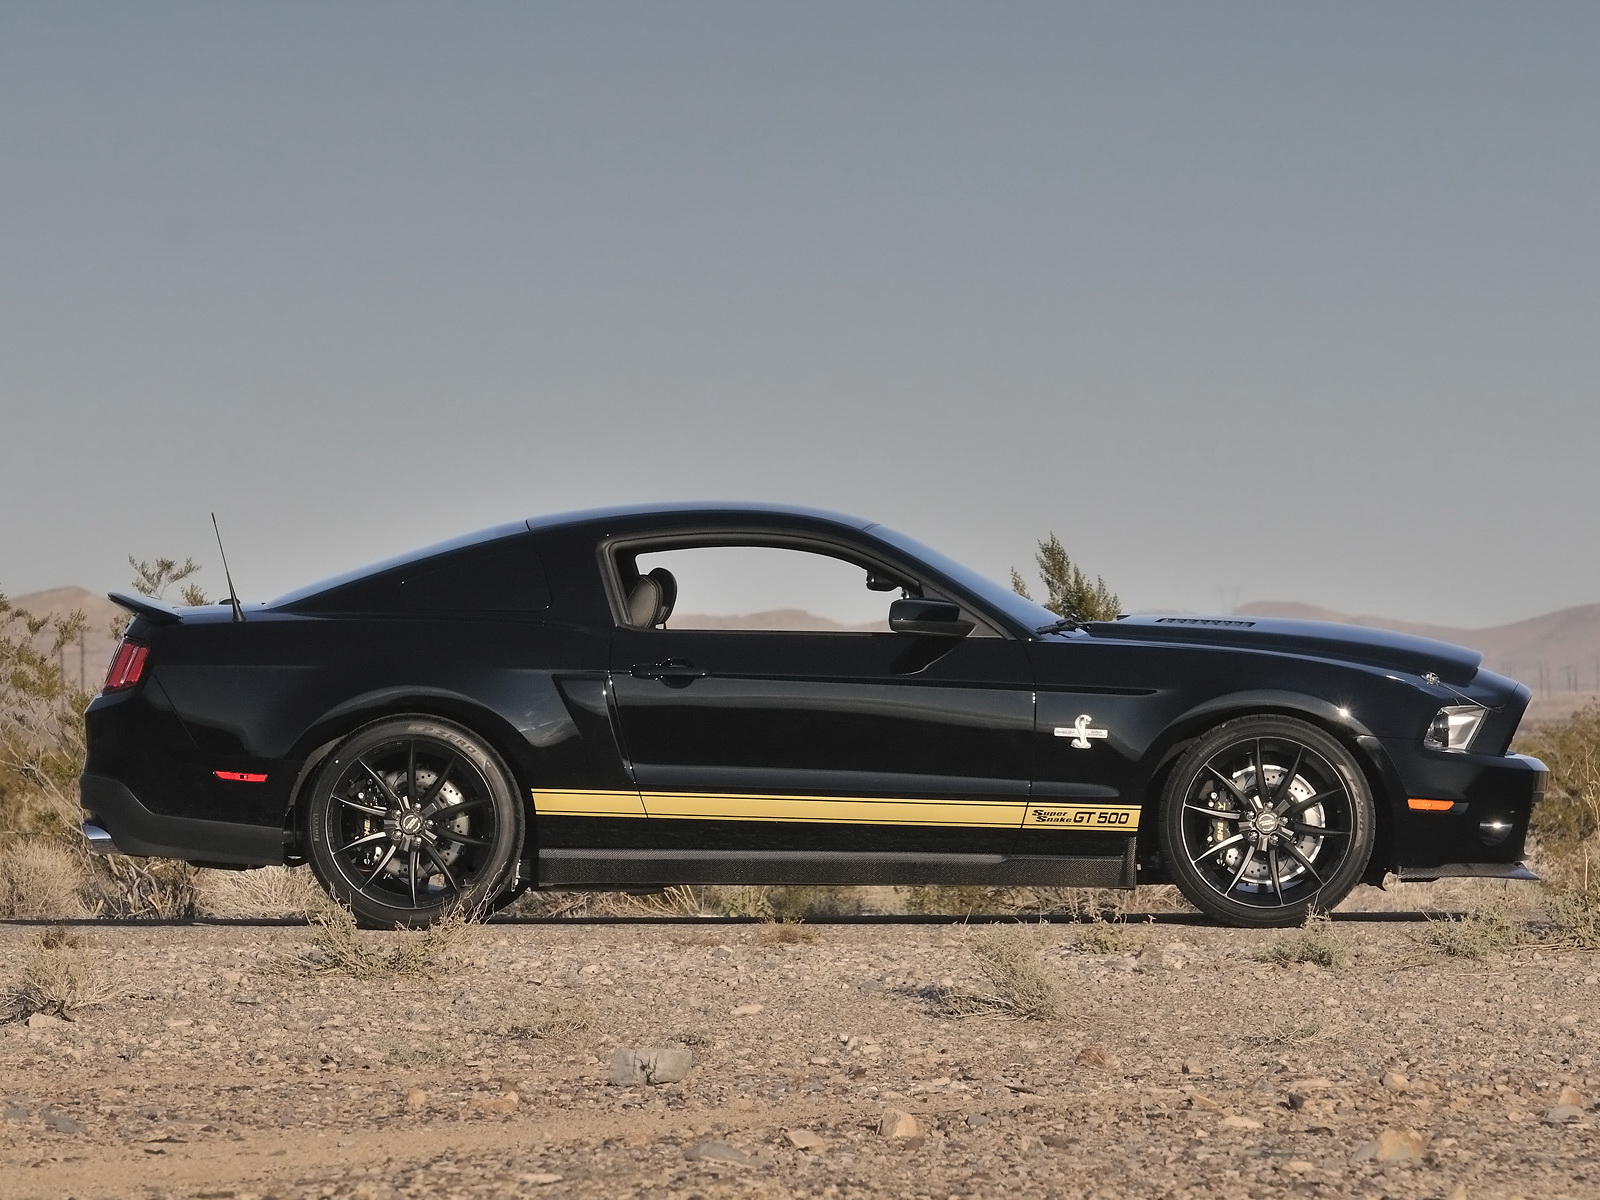 2012, Shelby, Gt500, Super snake, Ford, Mustang, Muscle Wallpaper